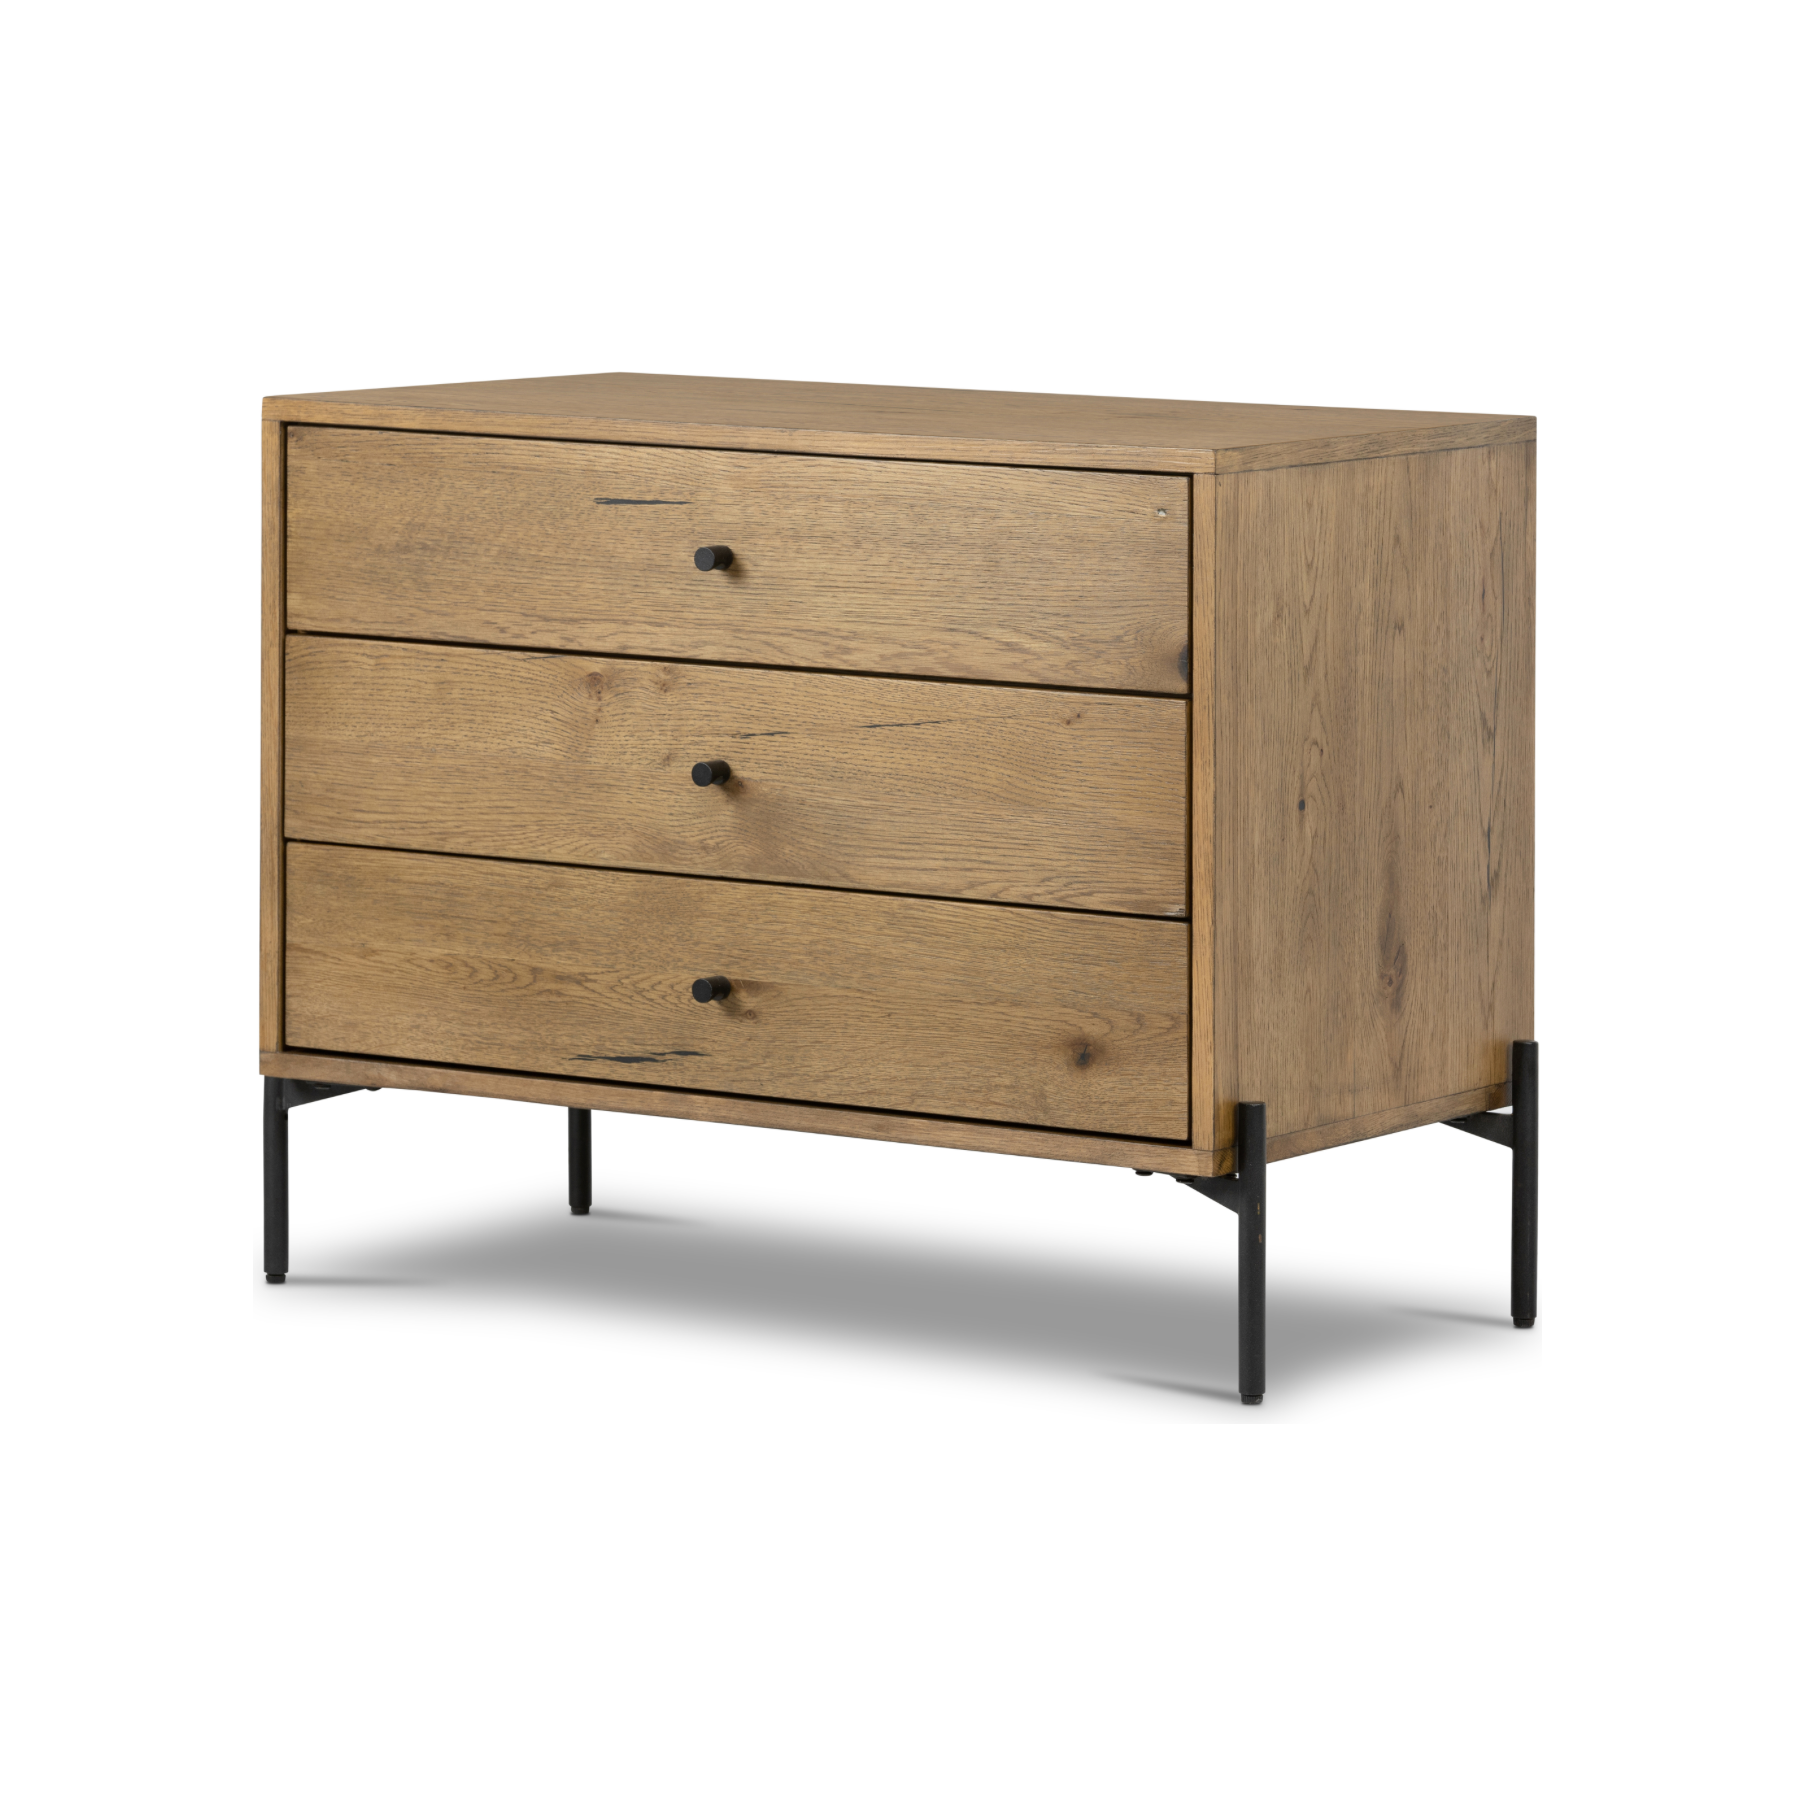 Clean and streamlined. Amber-finished oak features three large drawers plus gunmetal-finished hardware, for a look that's always in style. Dark resin plays up woods' natural graining.